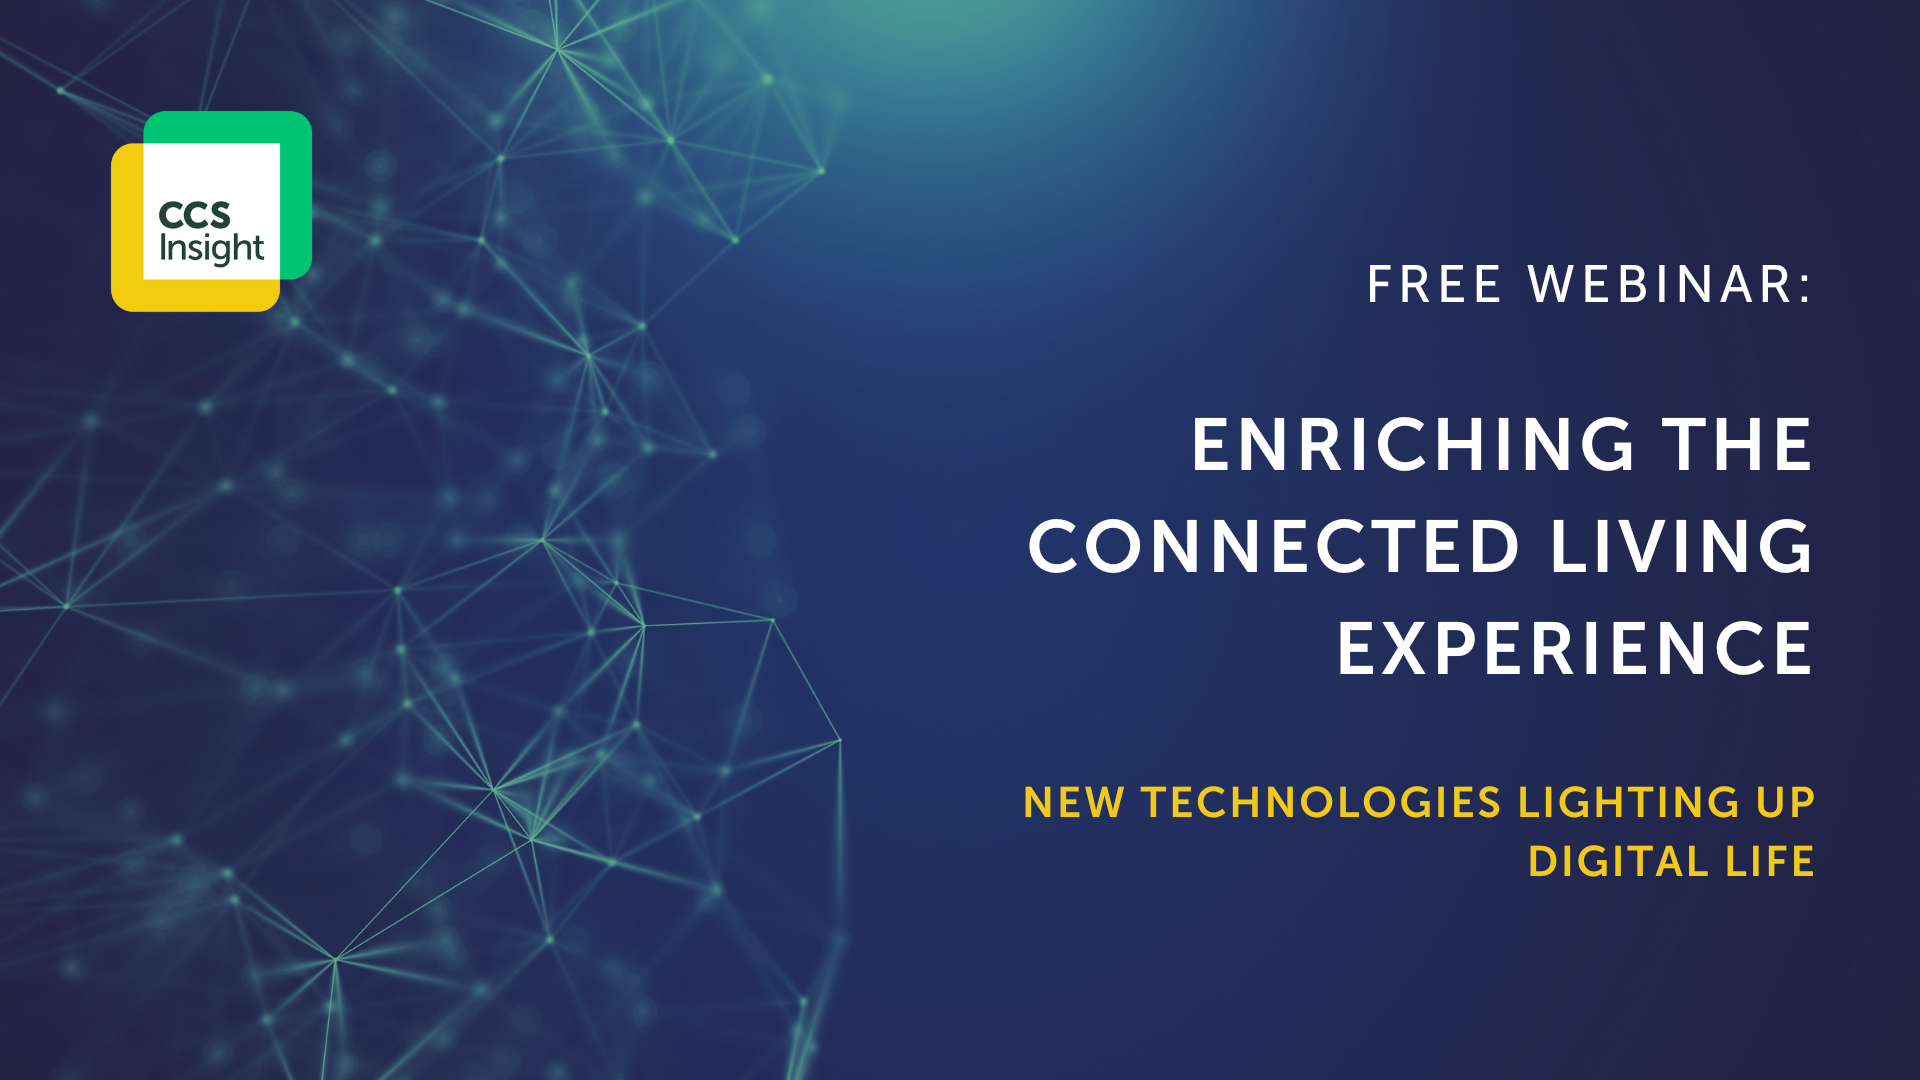 Enriching the Connected Living Experience